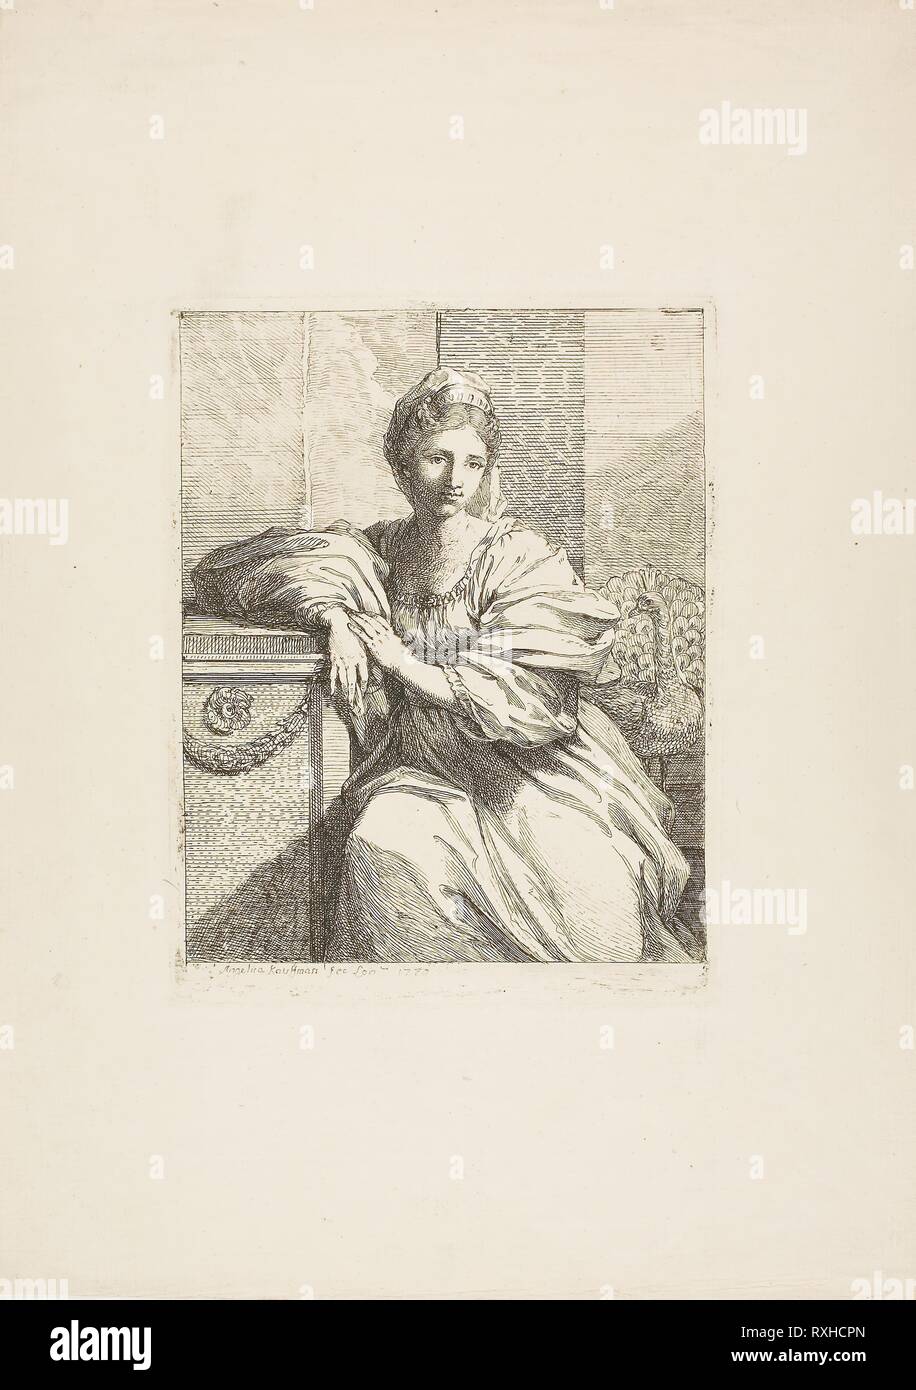 Juno and the Peacock. Angelica Kauffmann; Swiss, 1741-1807. Date: 1770. Dimensions: 210 x 163 mm. Etching on paper. Origin: Switzerland. Museum: The Chicago Art Institute. Stock Photo